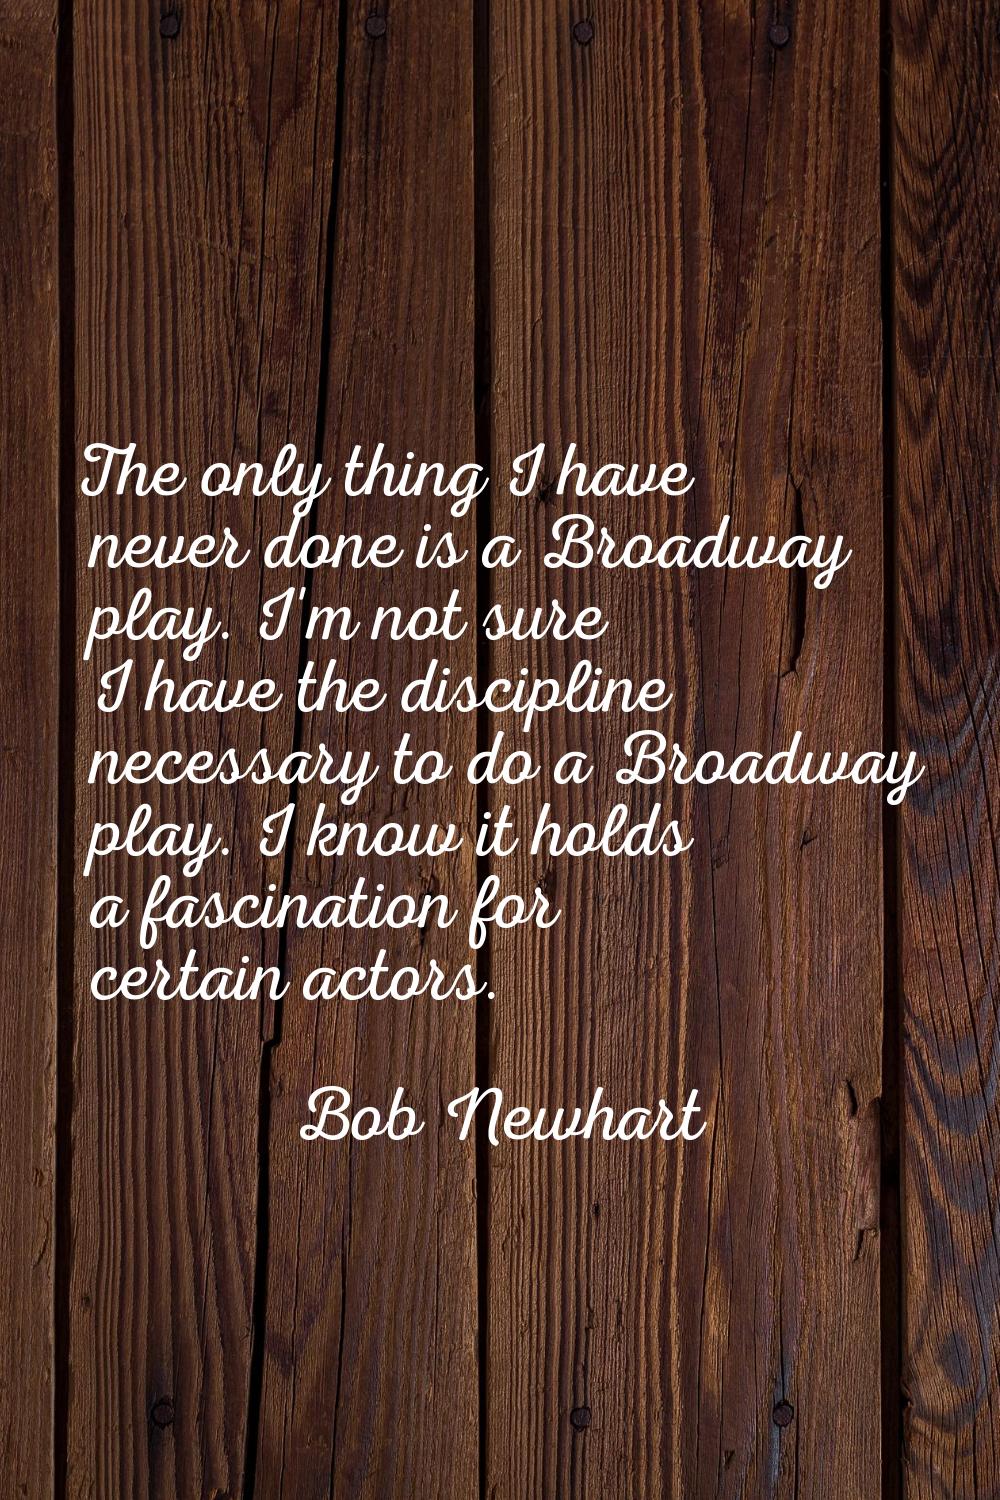 The only thing I have never done is a Broadway play. I'm not sure I have the discipline necessary t